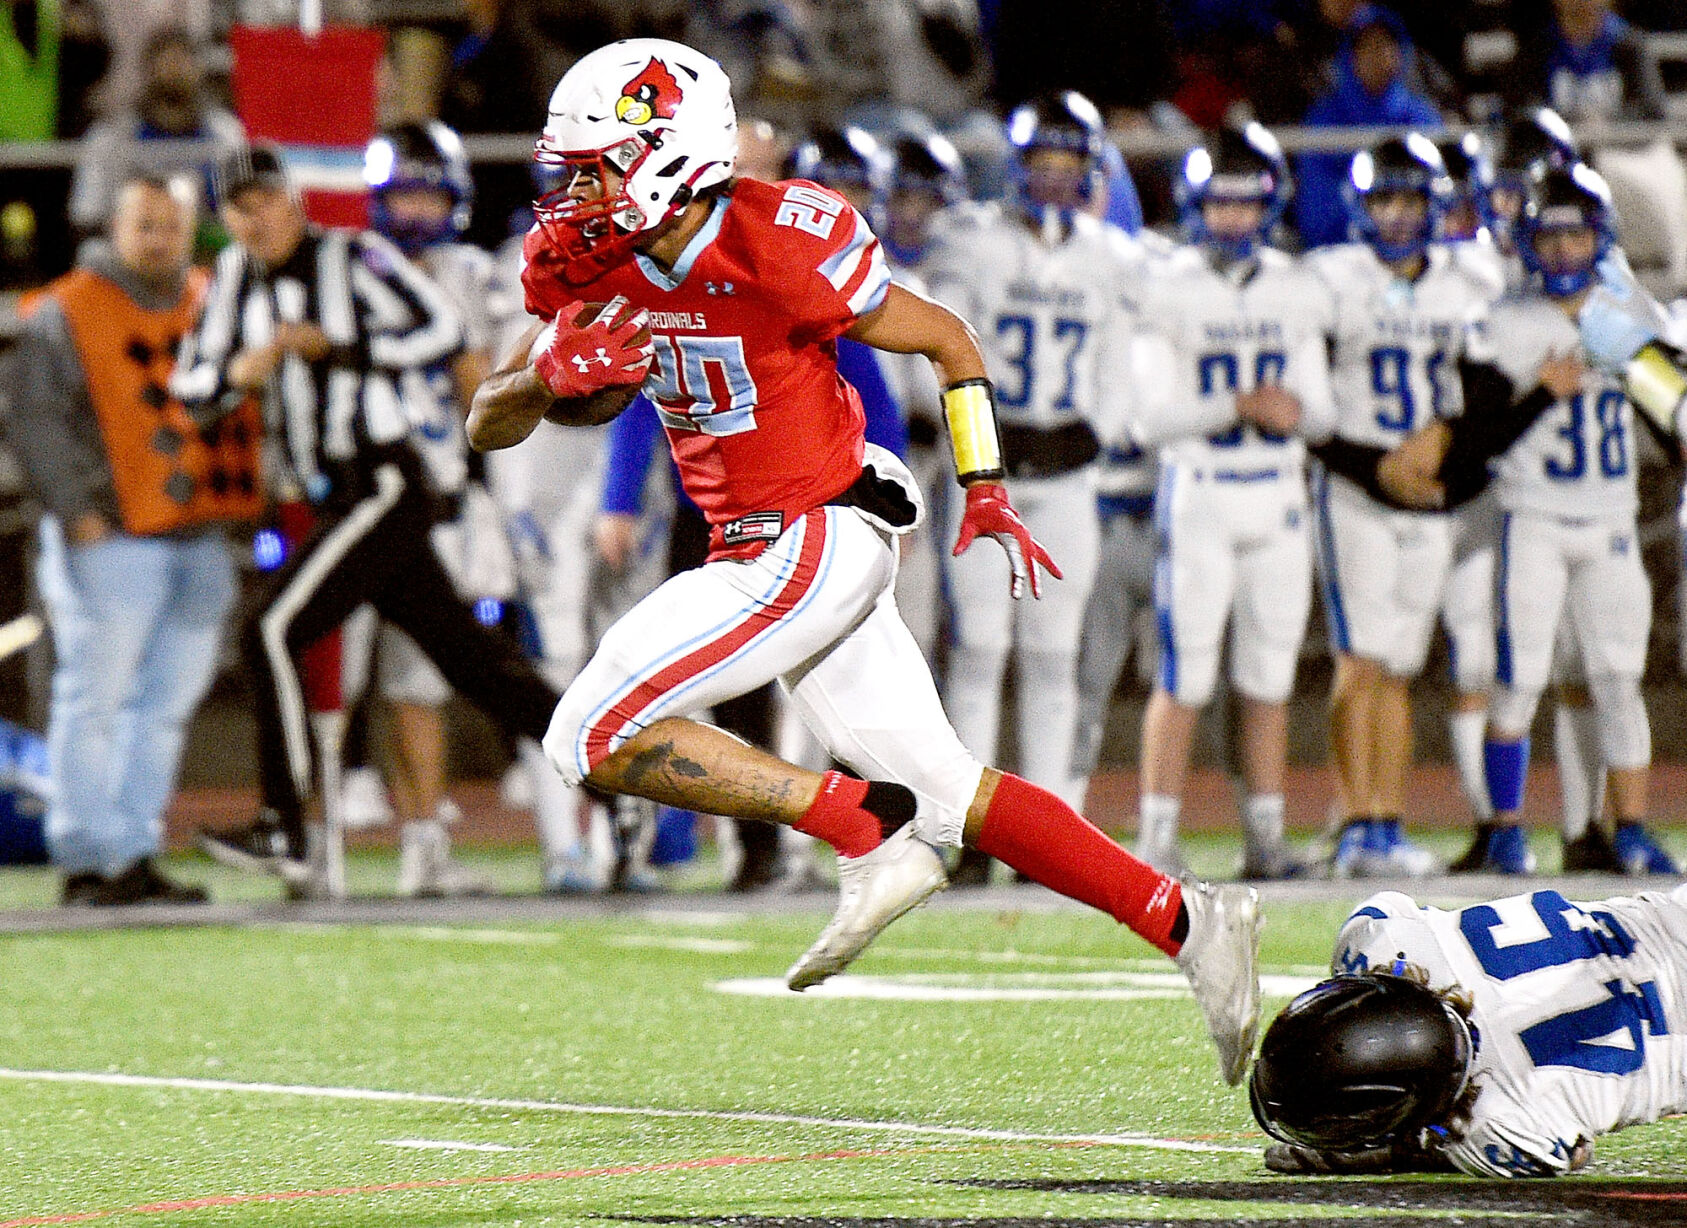 Webb City Cardinals Win State Semifinals with Strong Second-Half Performance